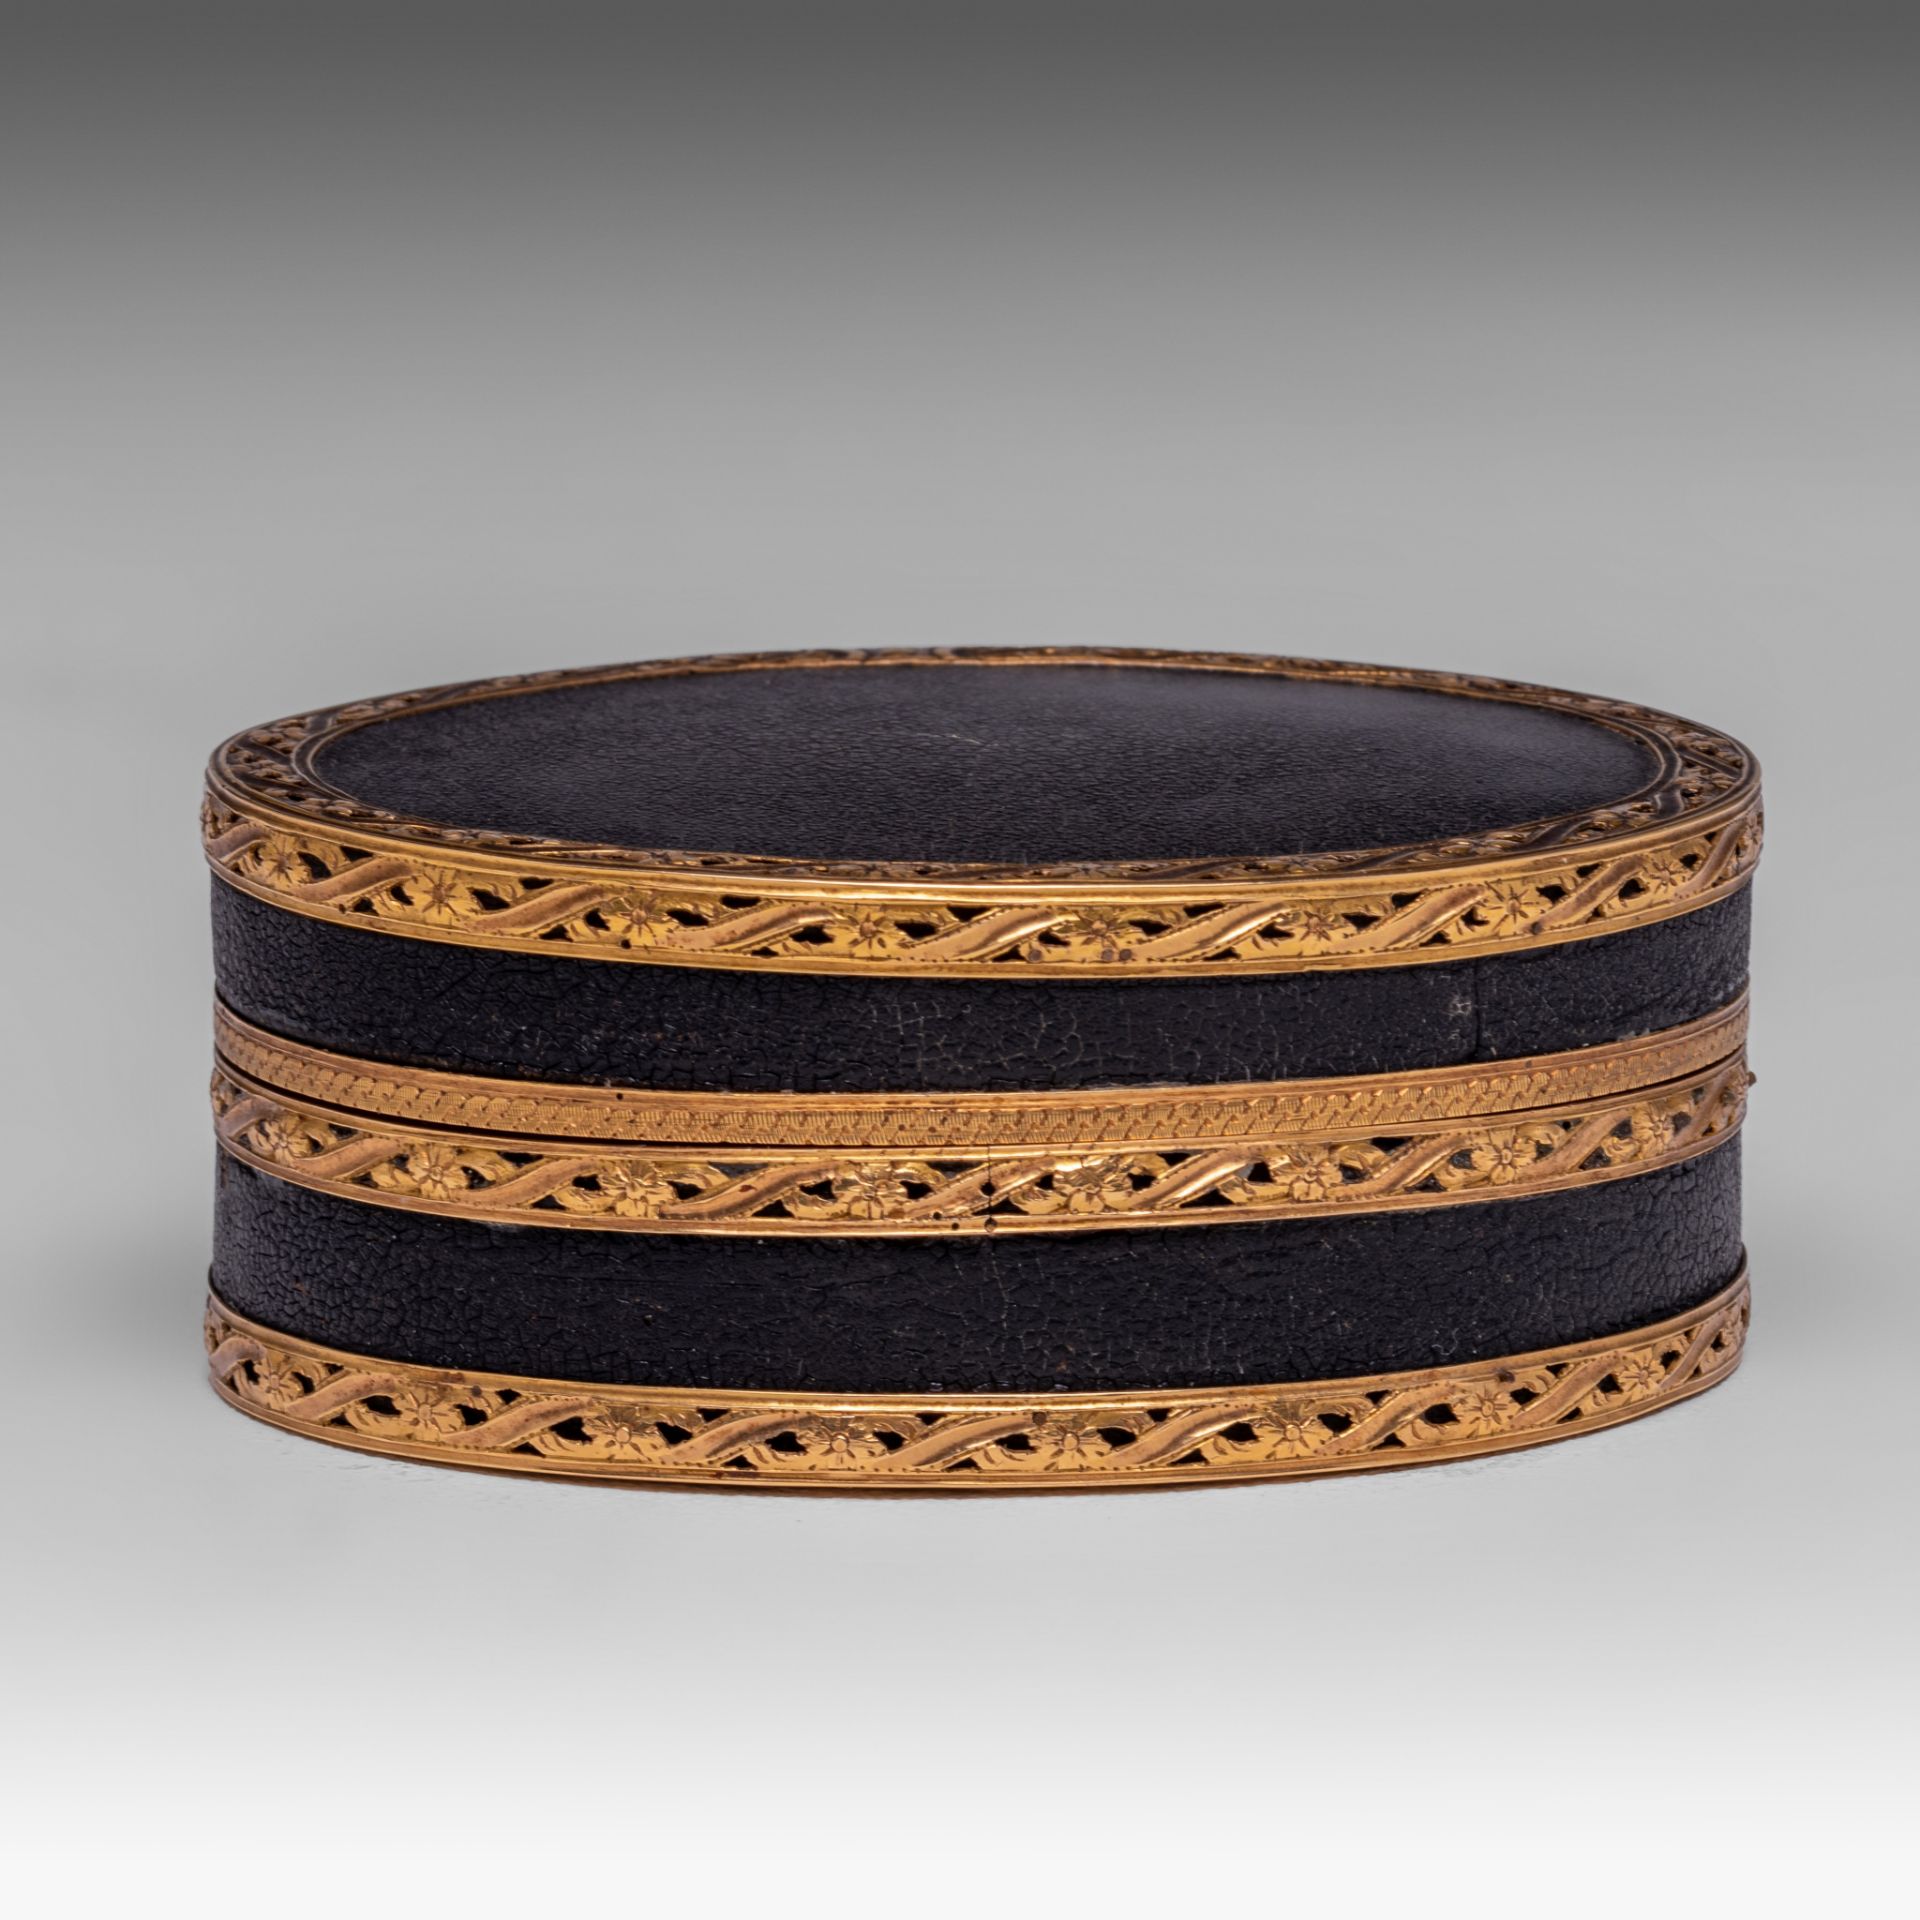 A fine Louis XVI leather and gold snuffbox, the inside with tortoiseshell, late 18thC, H 3,5 cm - Image 4 of 7